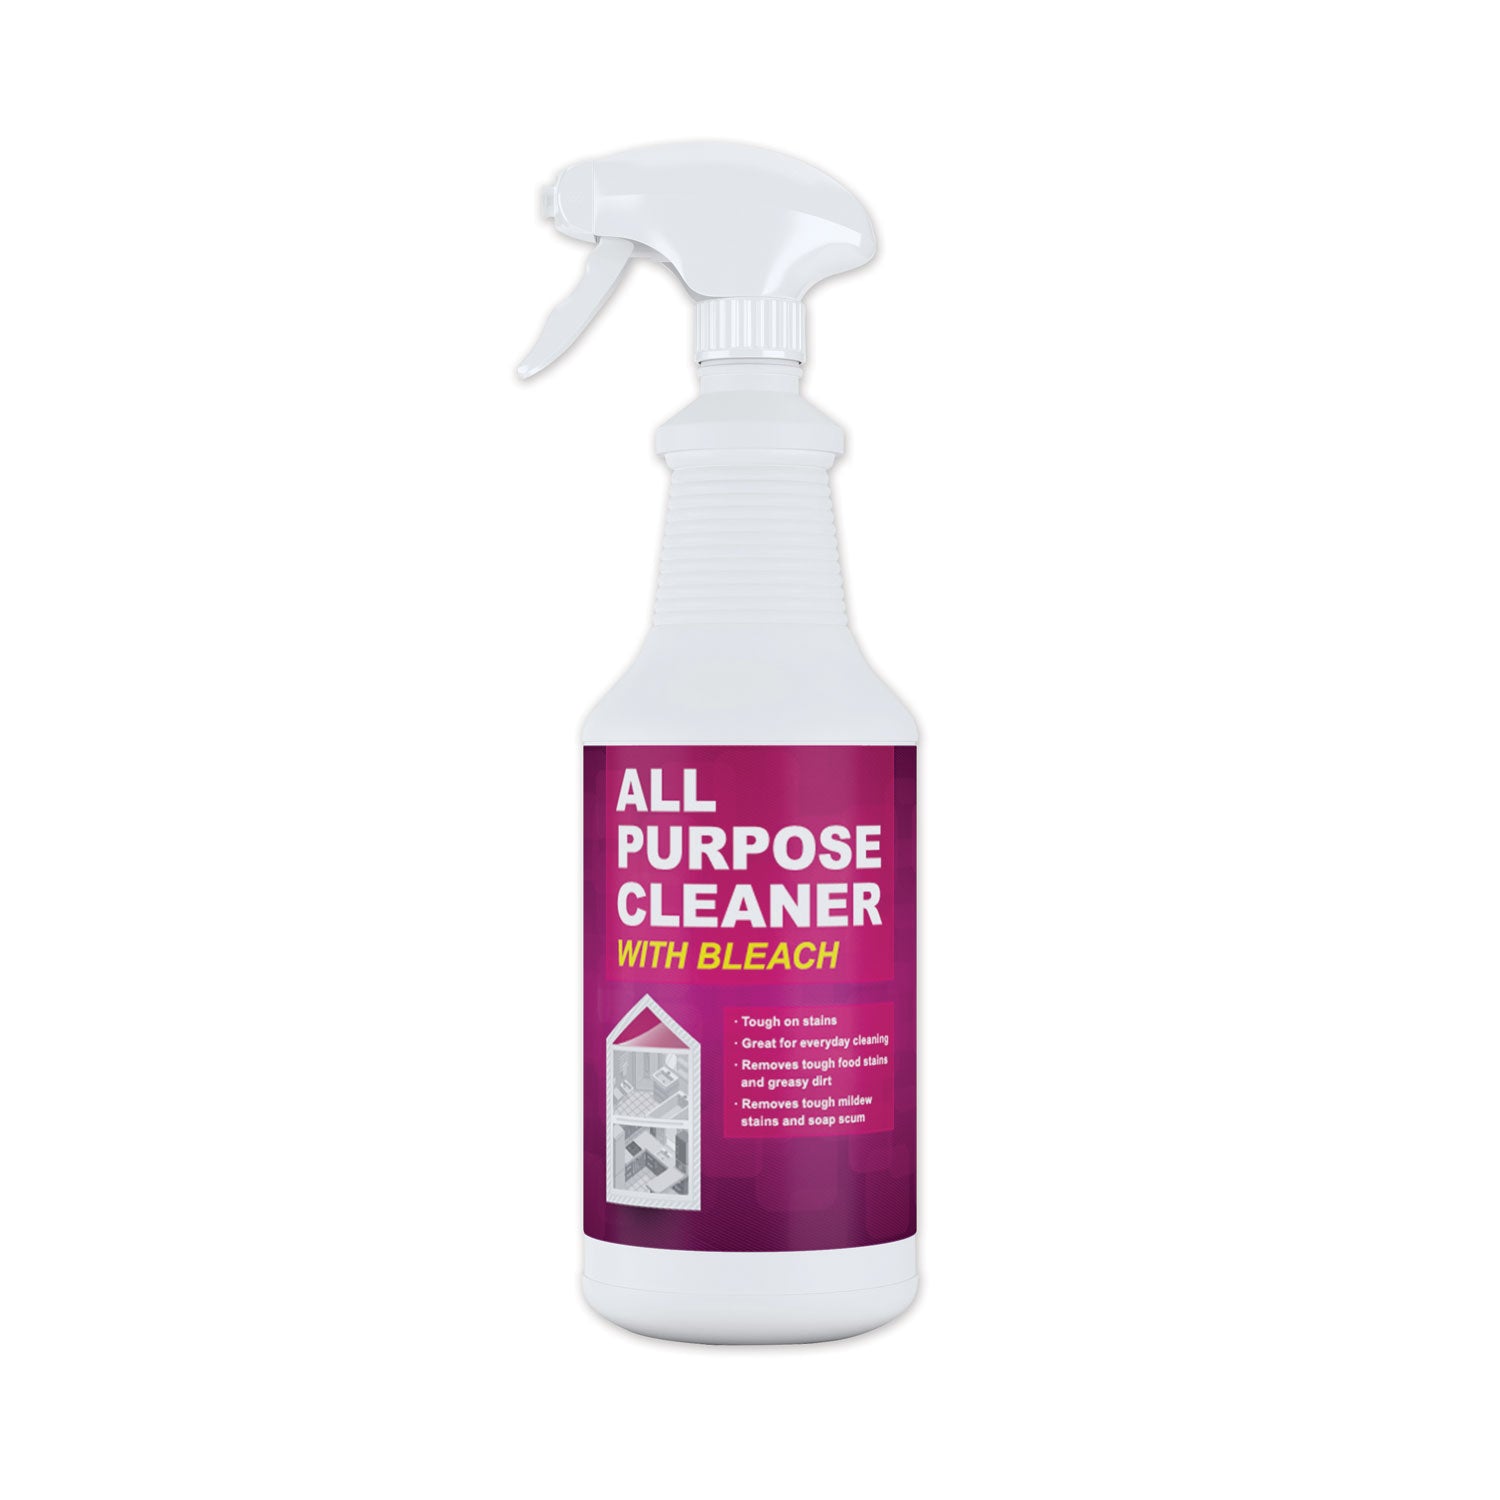 all-purpose-cleaner-with-bleach-32-oz-bottle-6-carton_gn15247l61 - 1